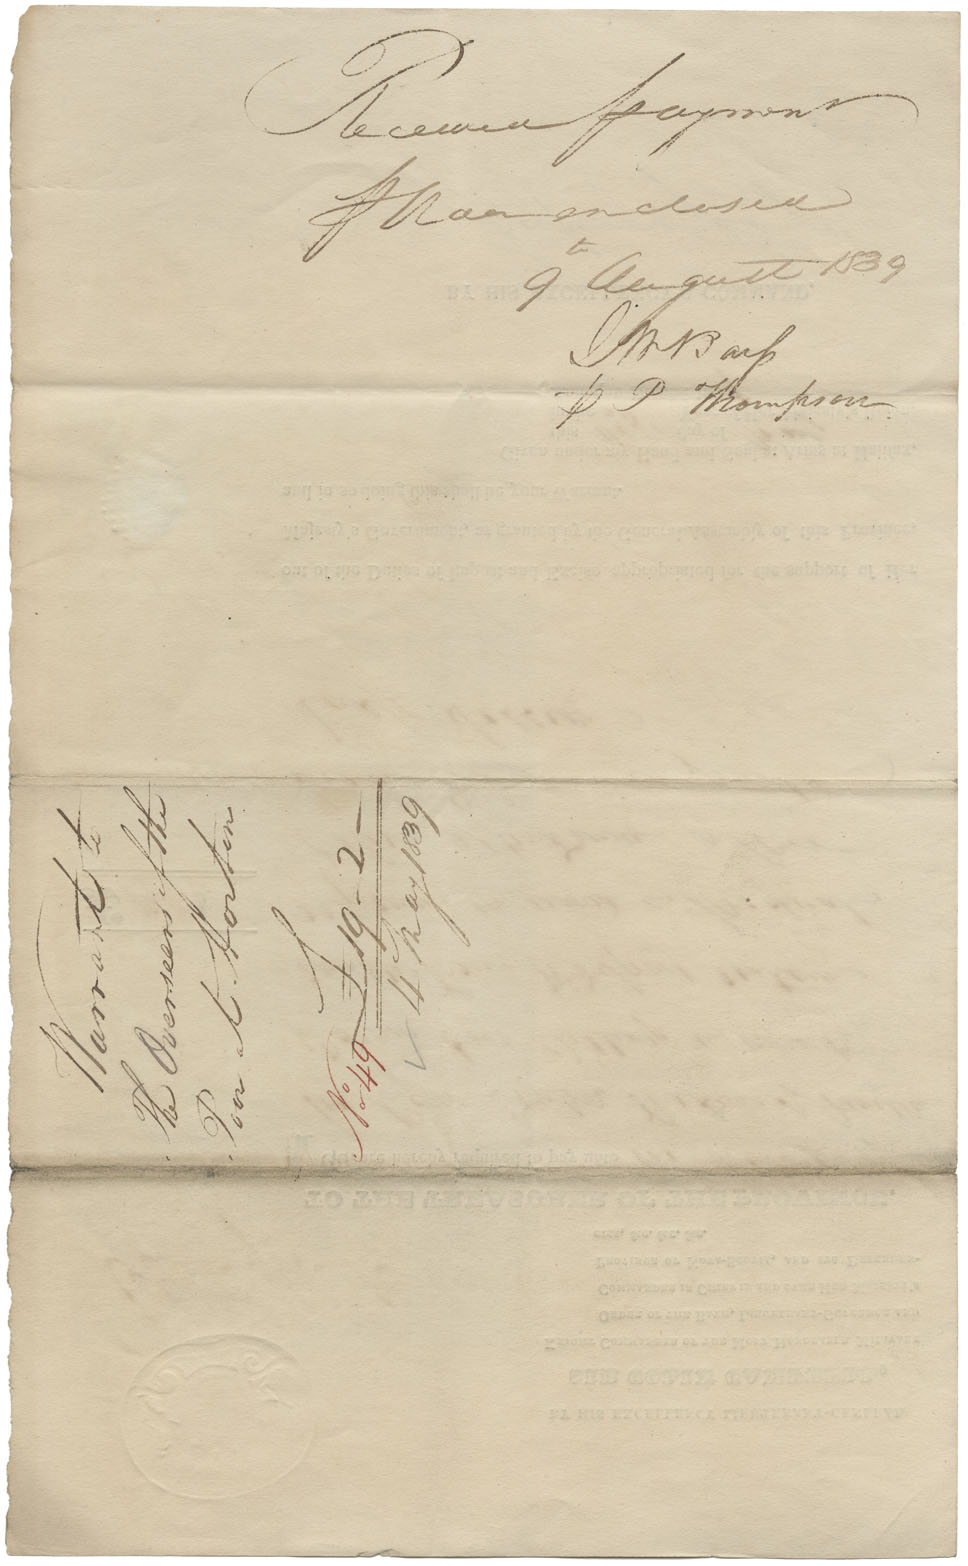 Warrant to William Taylor, et. al., Overseers of the Poor, at Horton, from Sir Colin Campbell, for £19-2-0 for medical attendance to Mi'kmaq. 